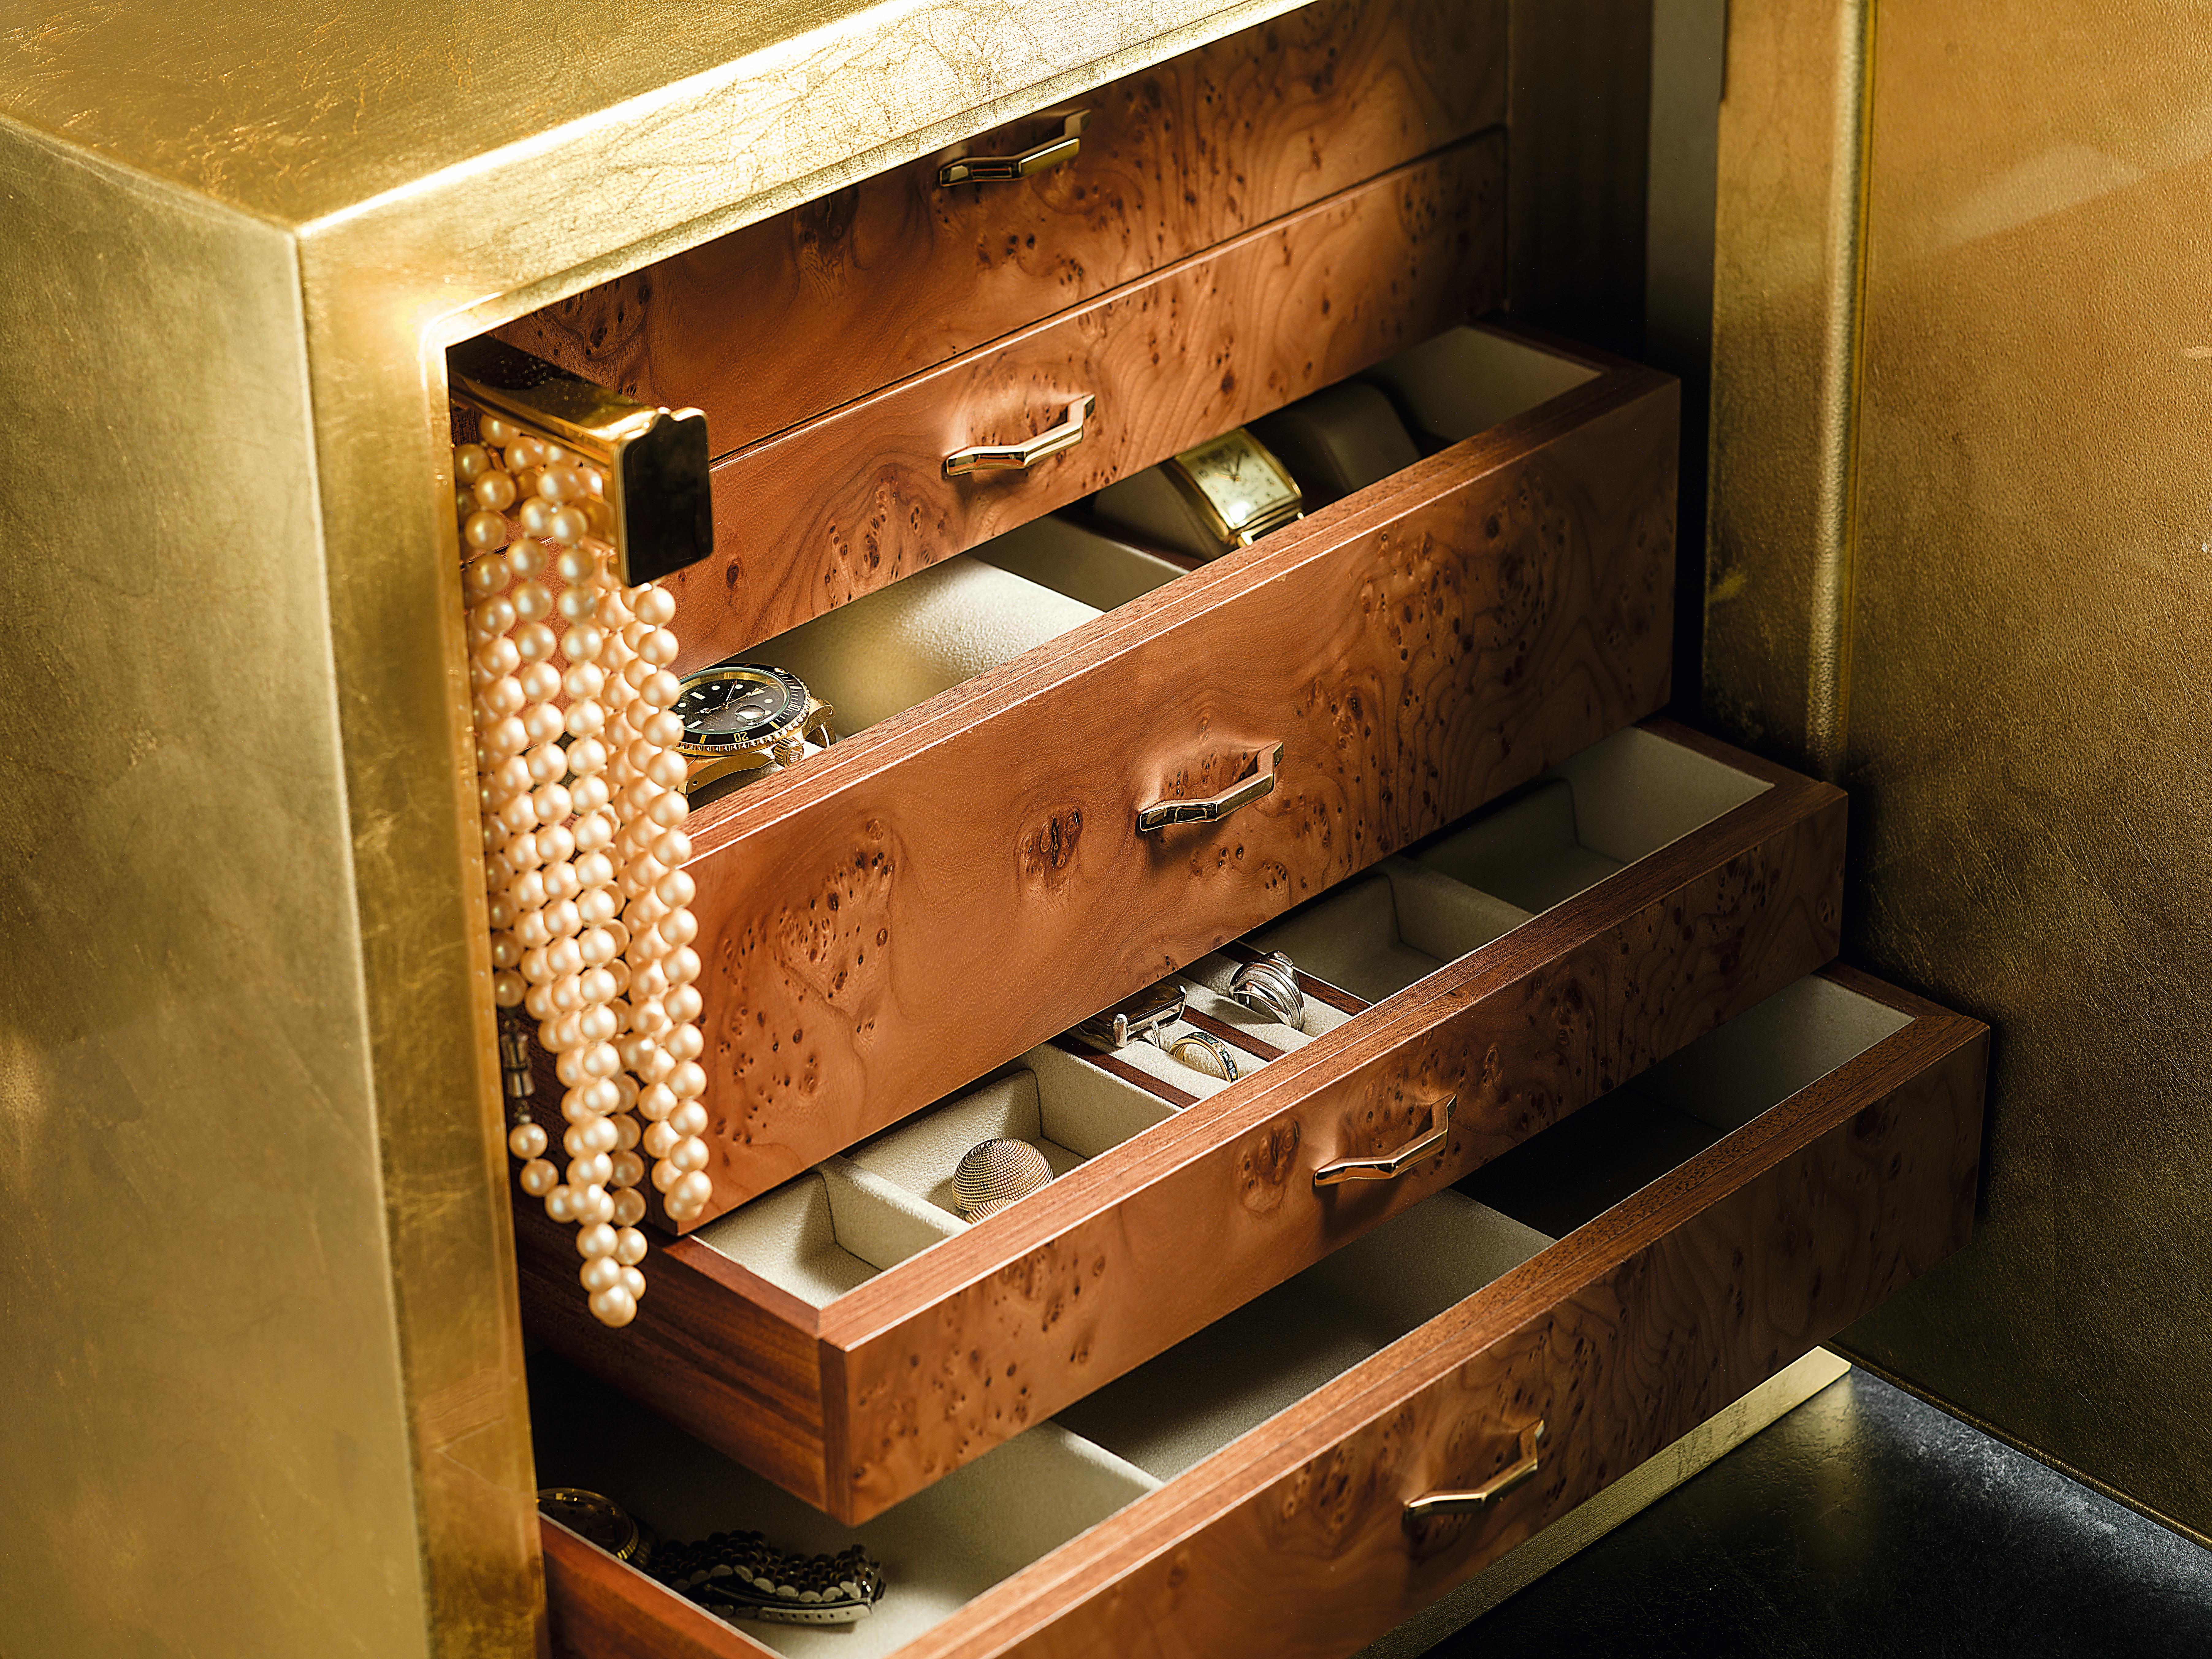 Armoured jewelry safe with pull out necklace bars. Shiny gold leaf steel. Inside drawers in polished ebony, 24 karats gold plated brass accessories.. Made in Florence, Italy by Agresti since 1949.
